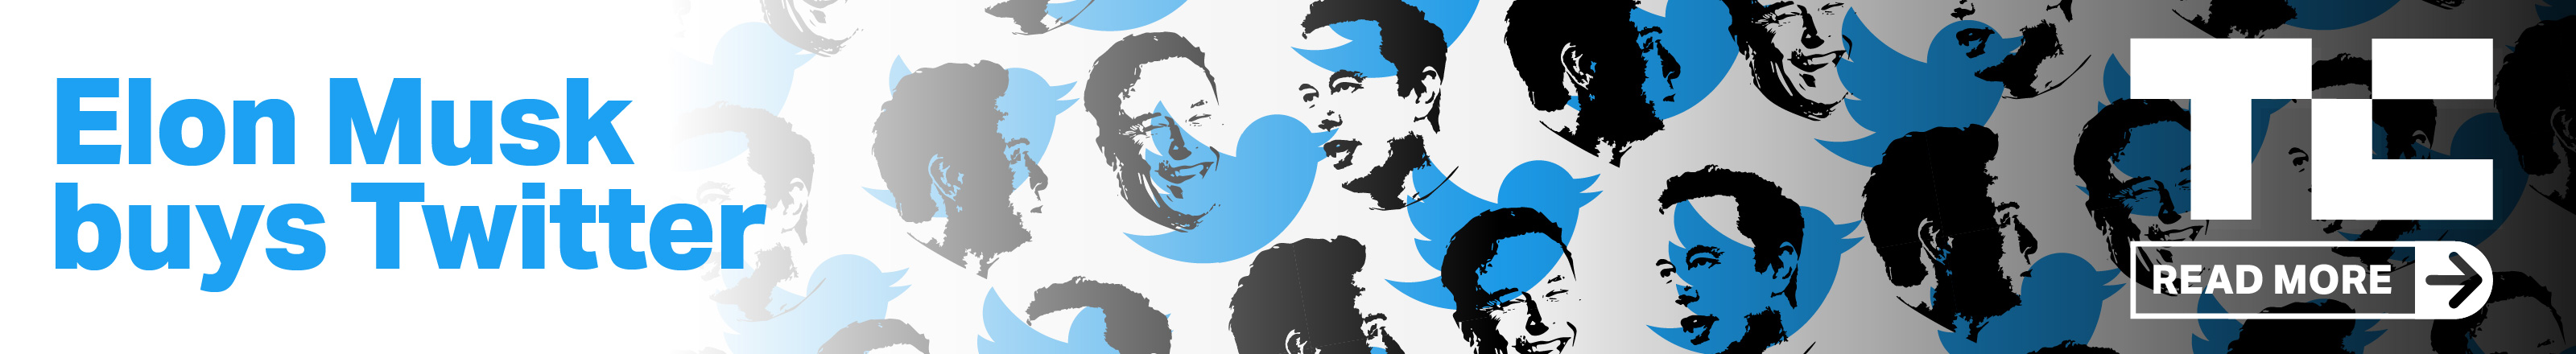 Read more about Elon Musk's purchase of Twitter at TechCrunch